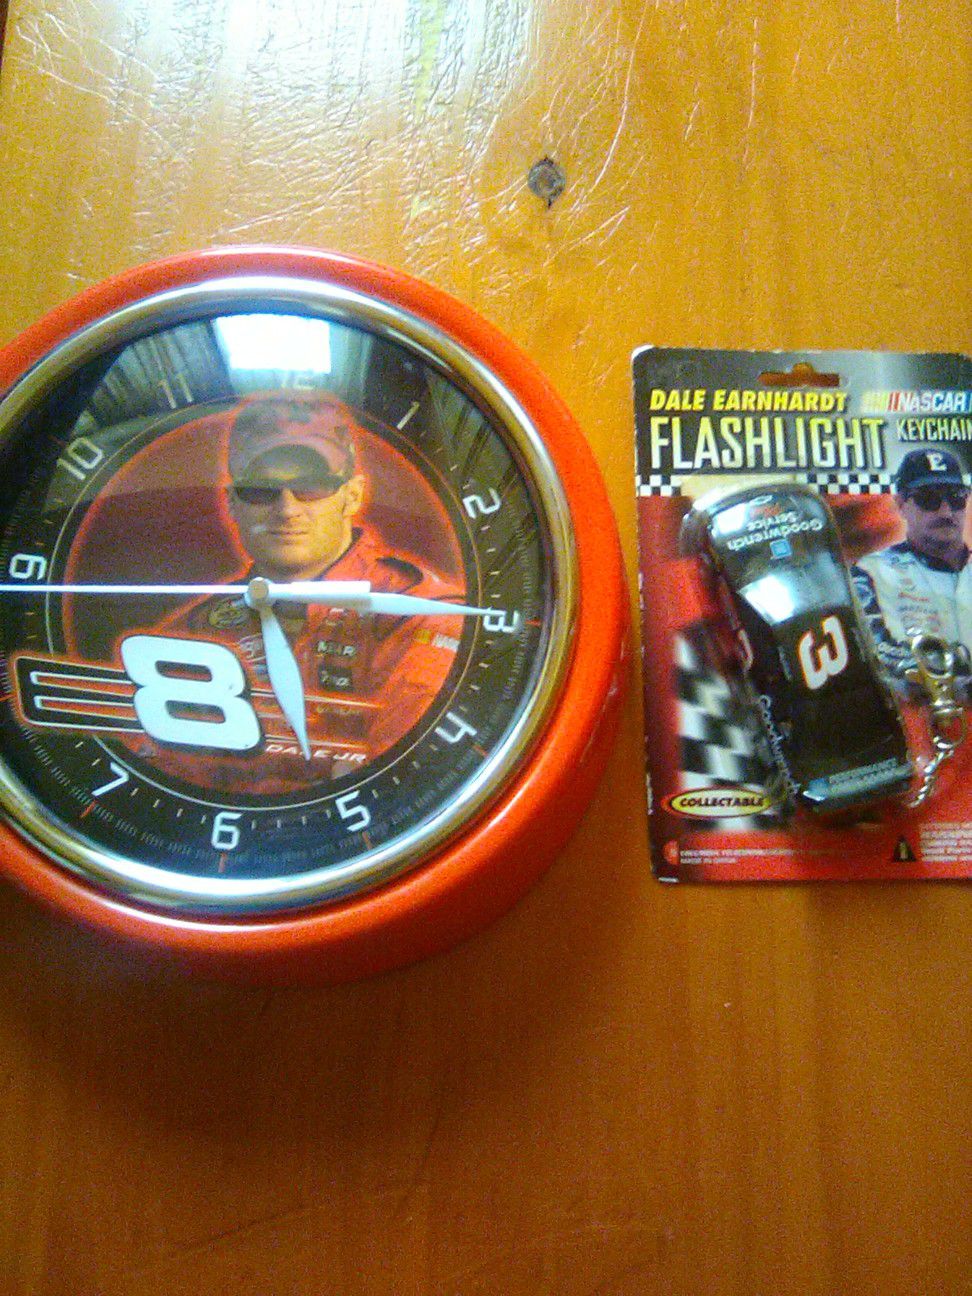 Dale Jr glass and metal clock and Dale sr flashlight keychain